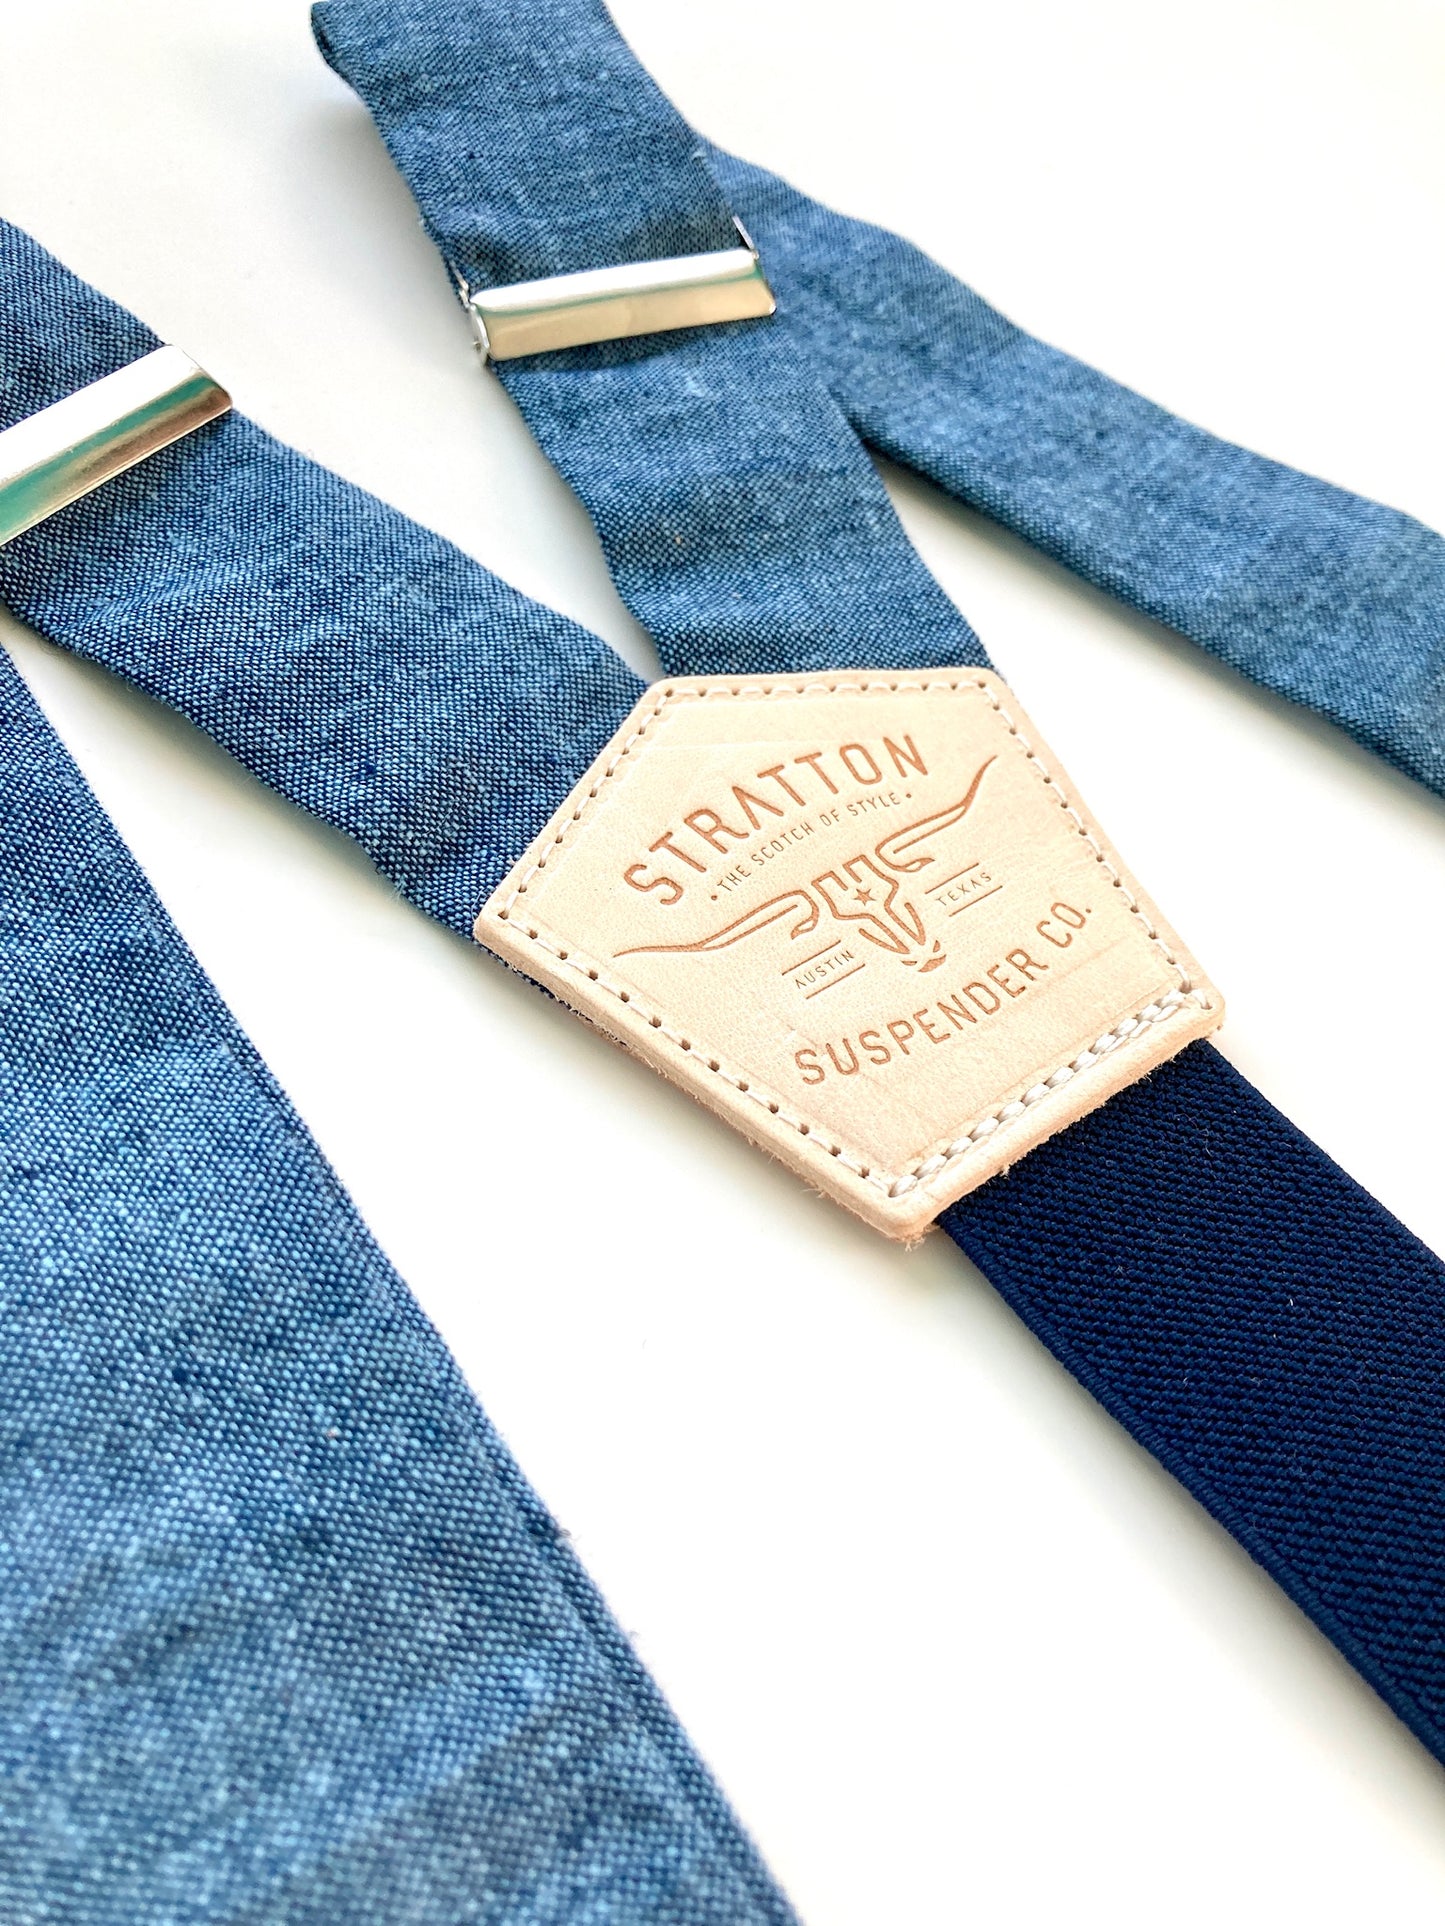 Peacock Linen Button On Suspenders Set - Spring Collection Stratton Suspender Co.